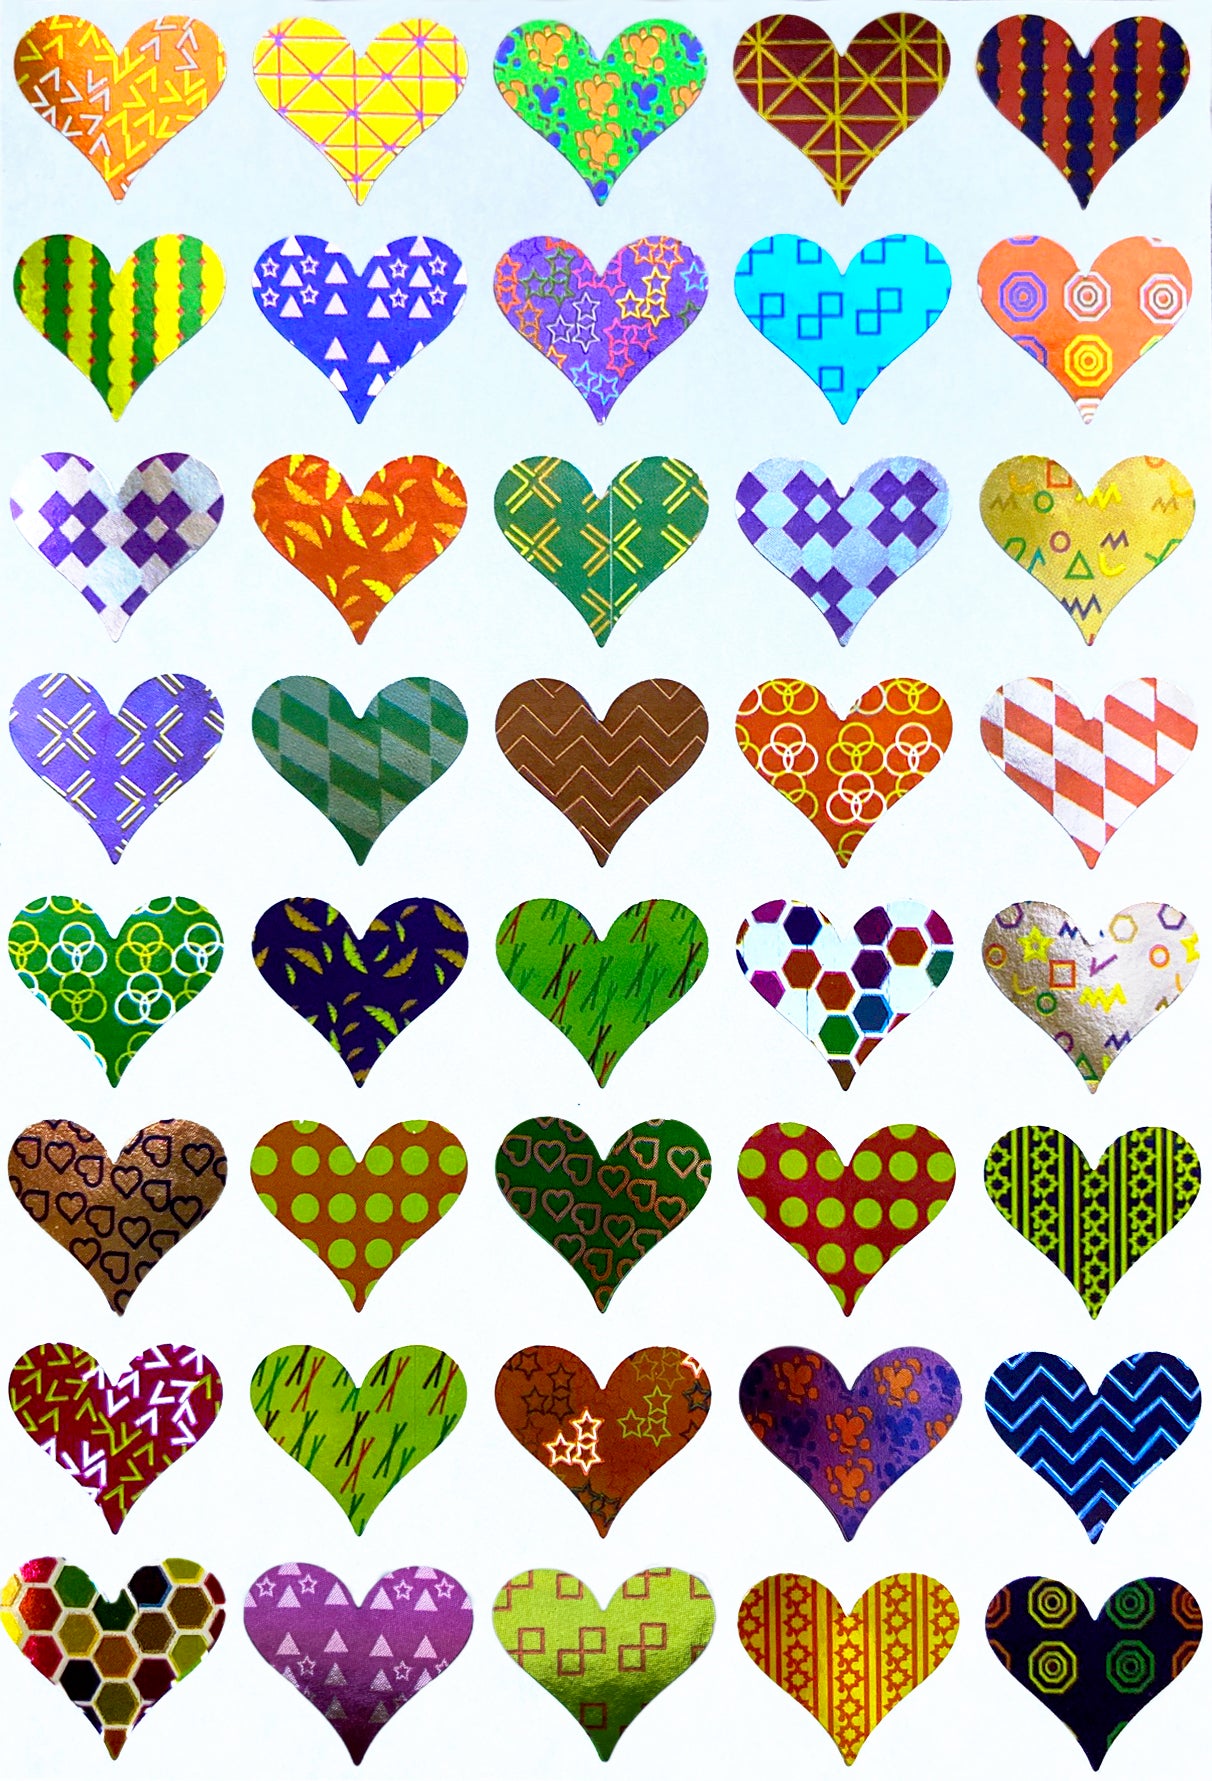  Royal Green Heart Sticker Labels for Stationery Envelopes 3/4  Teacher Supply Stickers, Gift Packaging, Party Favor and Bags in Purple -  400 Pack : Office Products